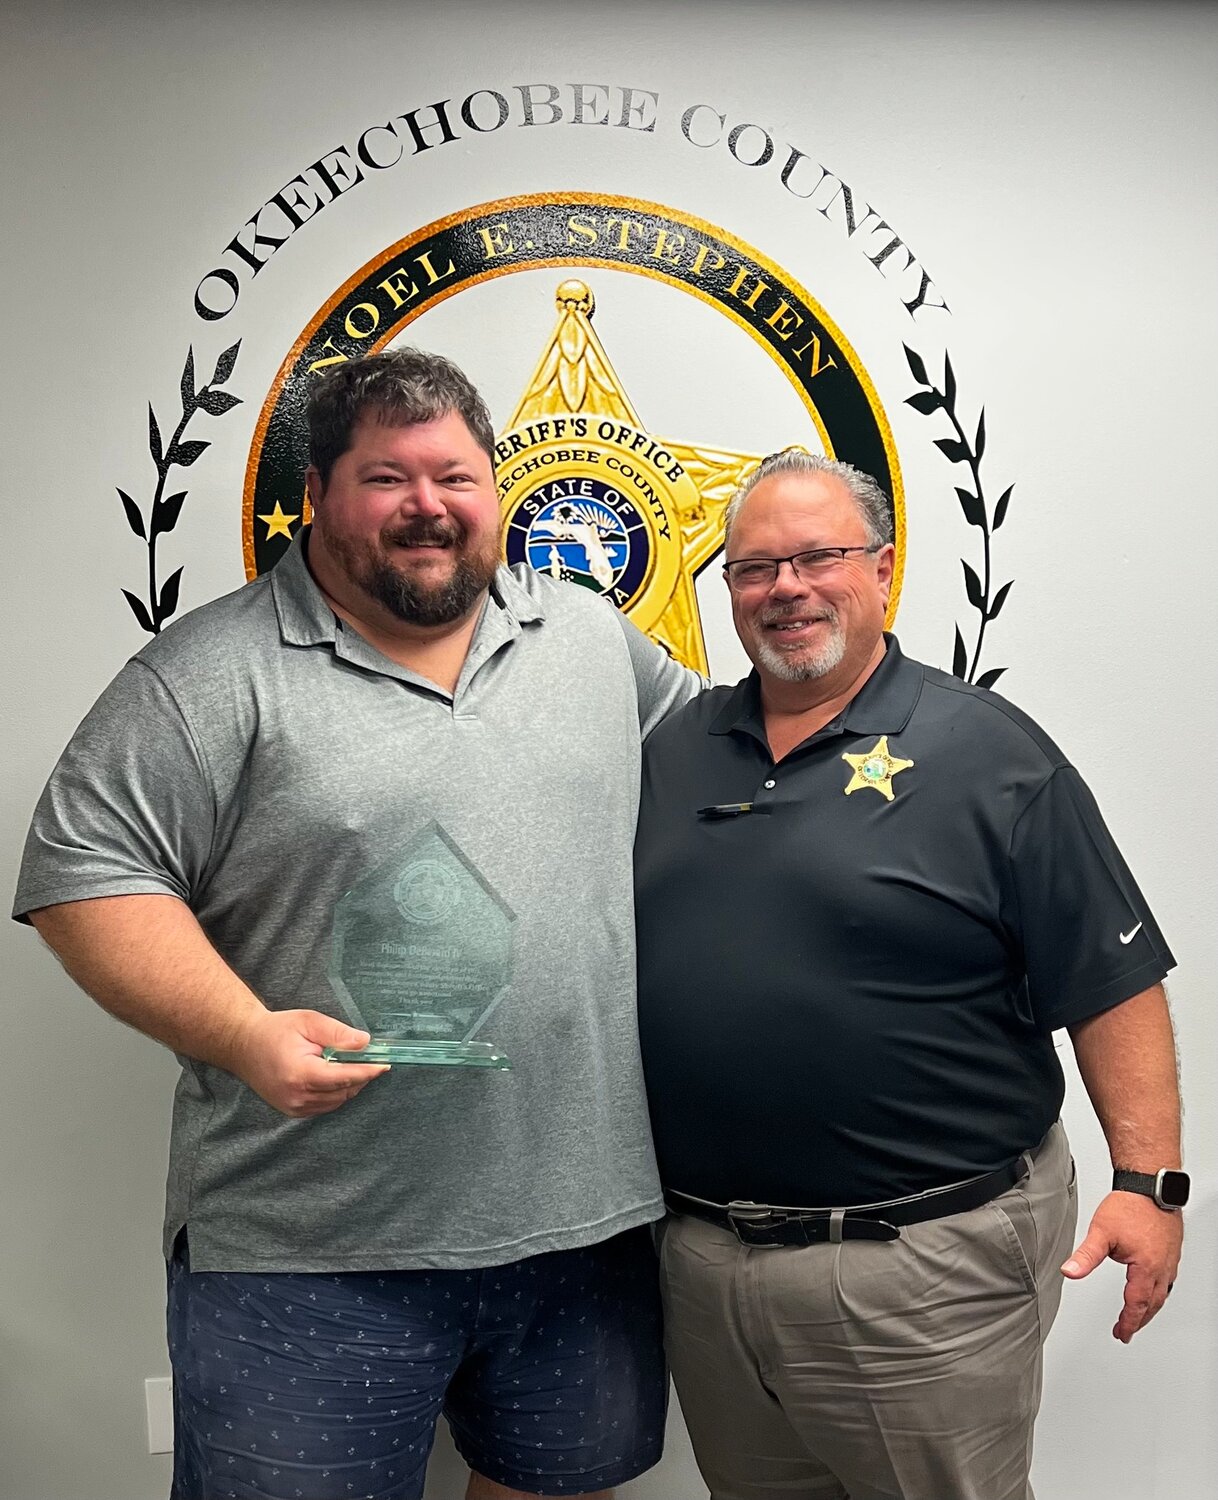 Thank you for all you do. Pictured are Philip Deberard (left) and Sheriff Noel E Stephen.